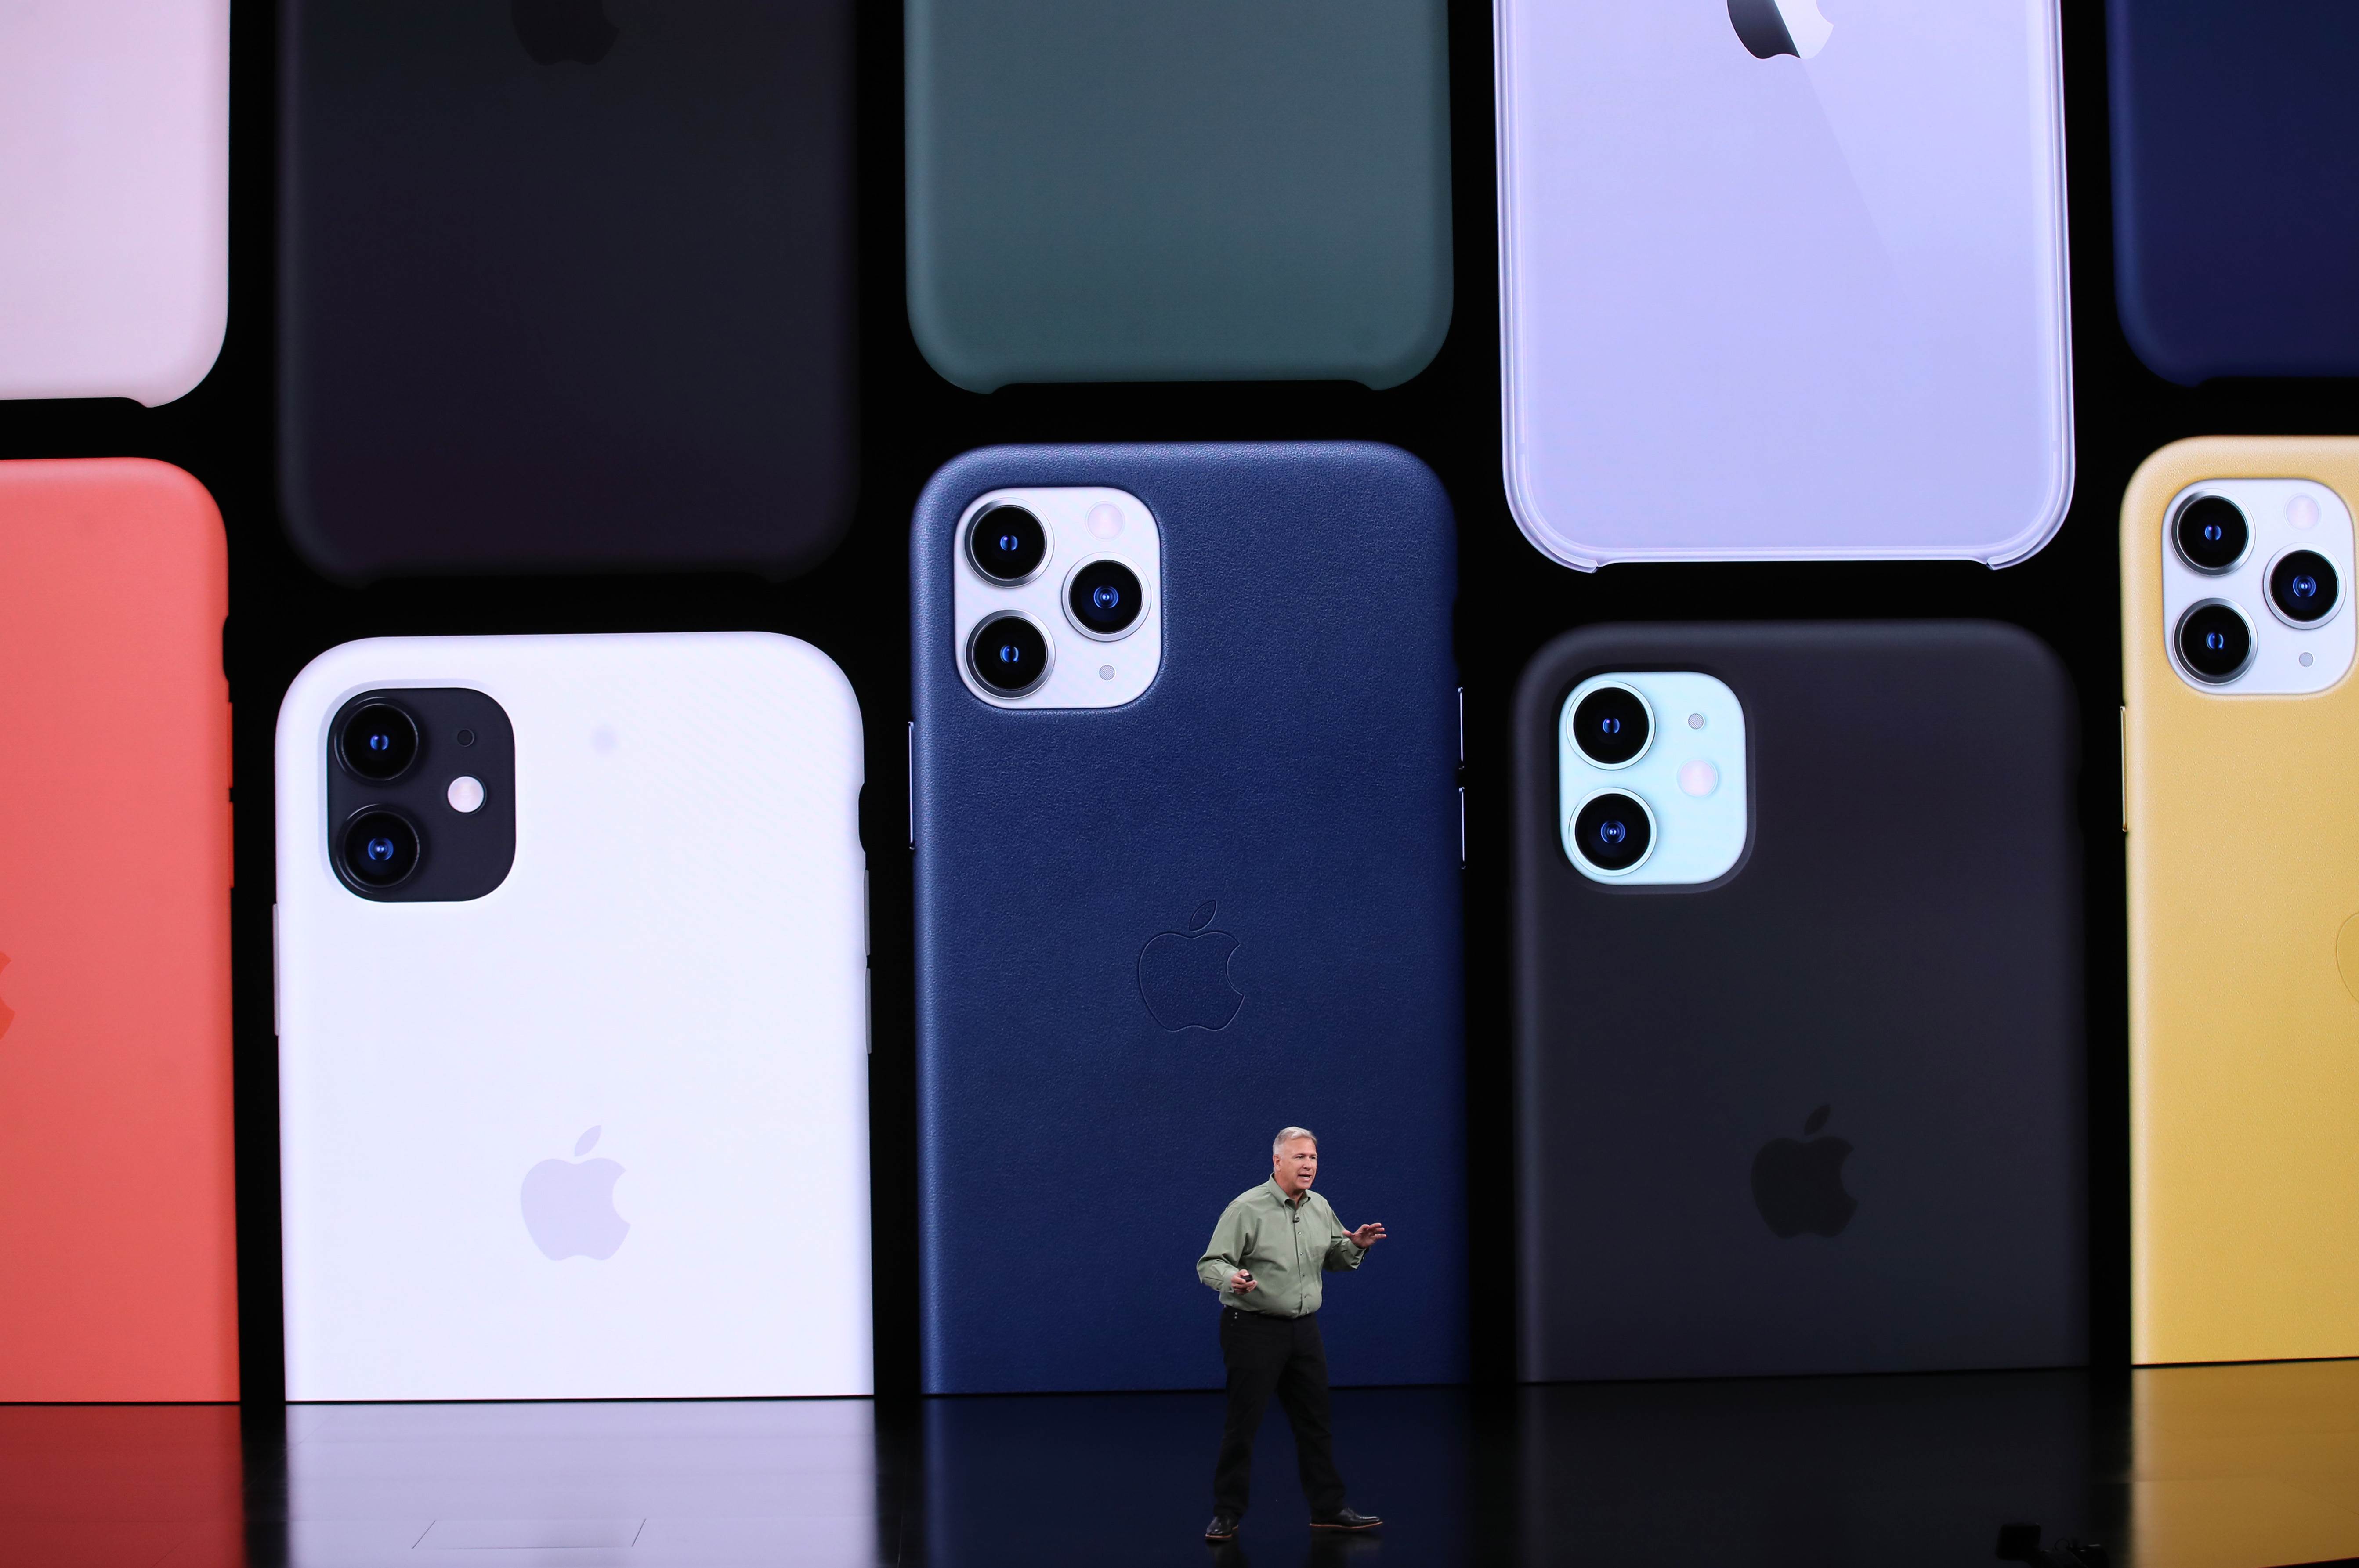 Midnight green among brand new colors for Apple's new iPhone 11 series